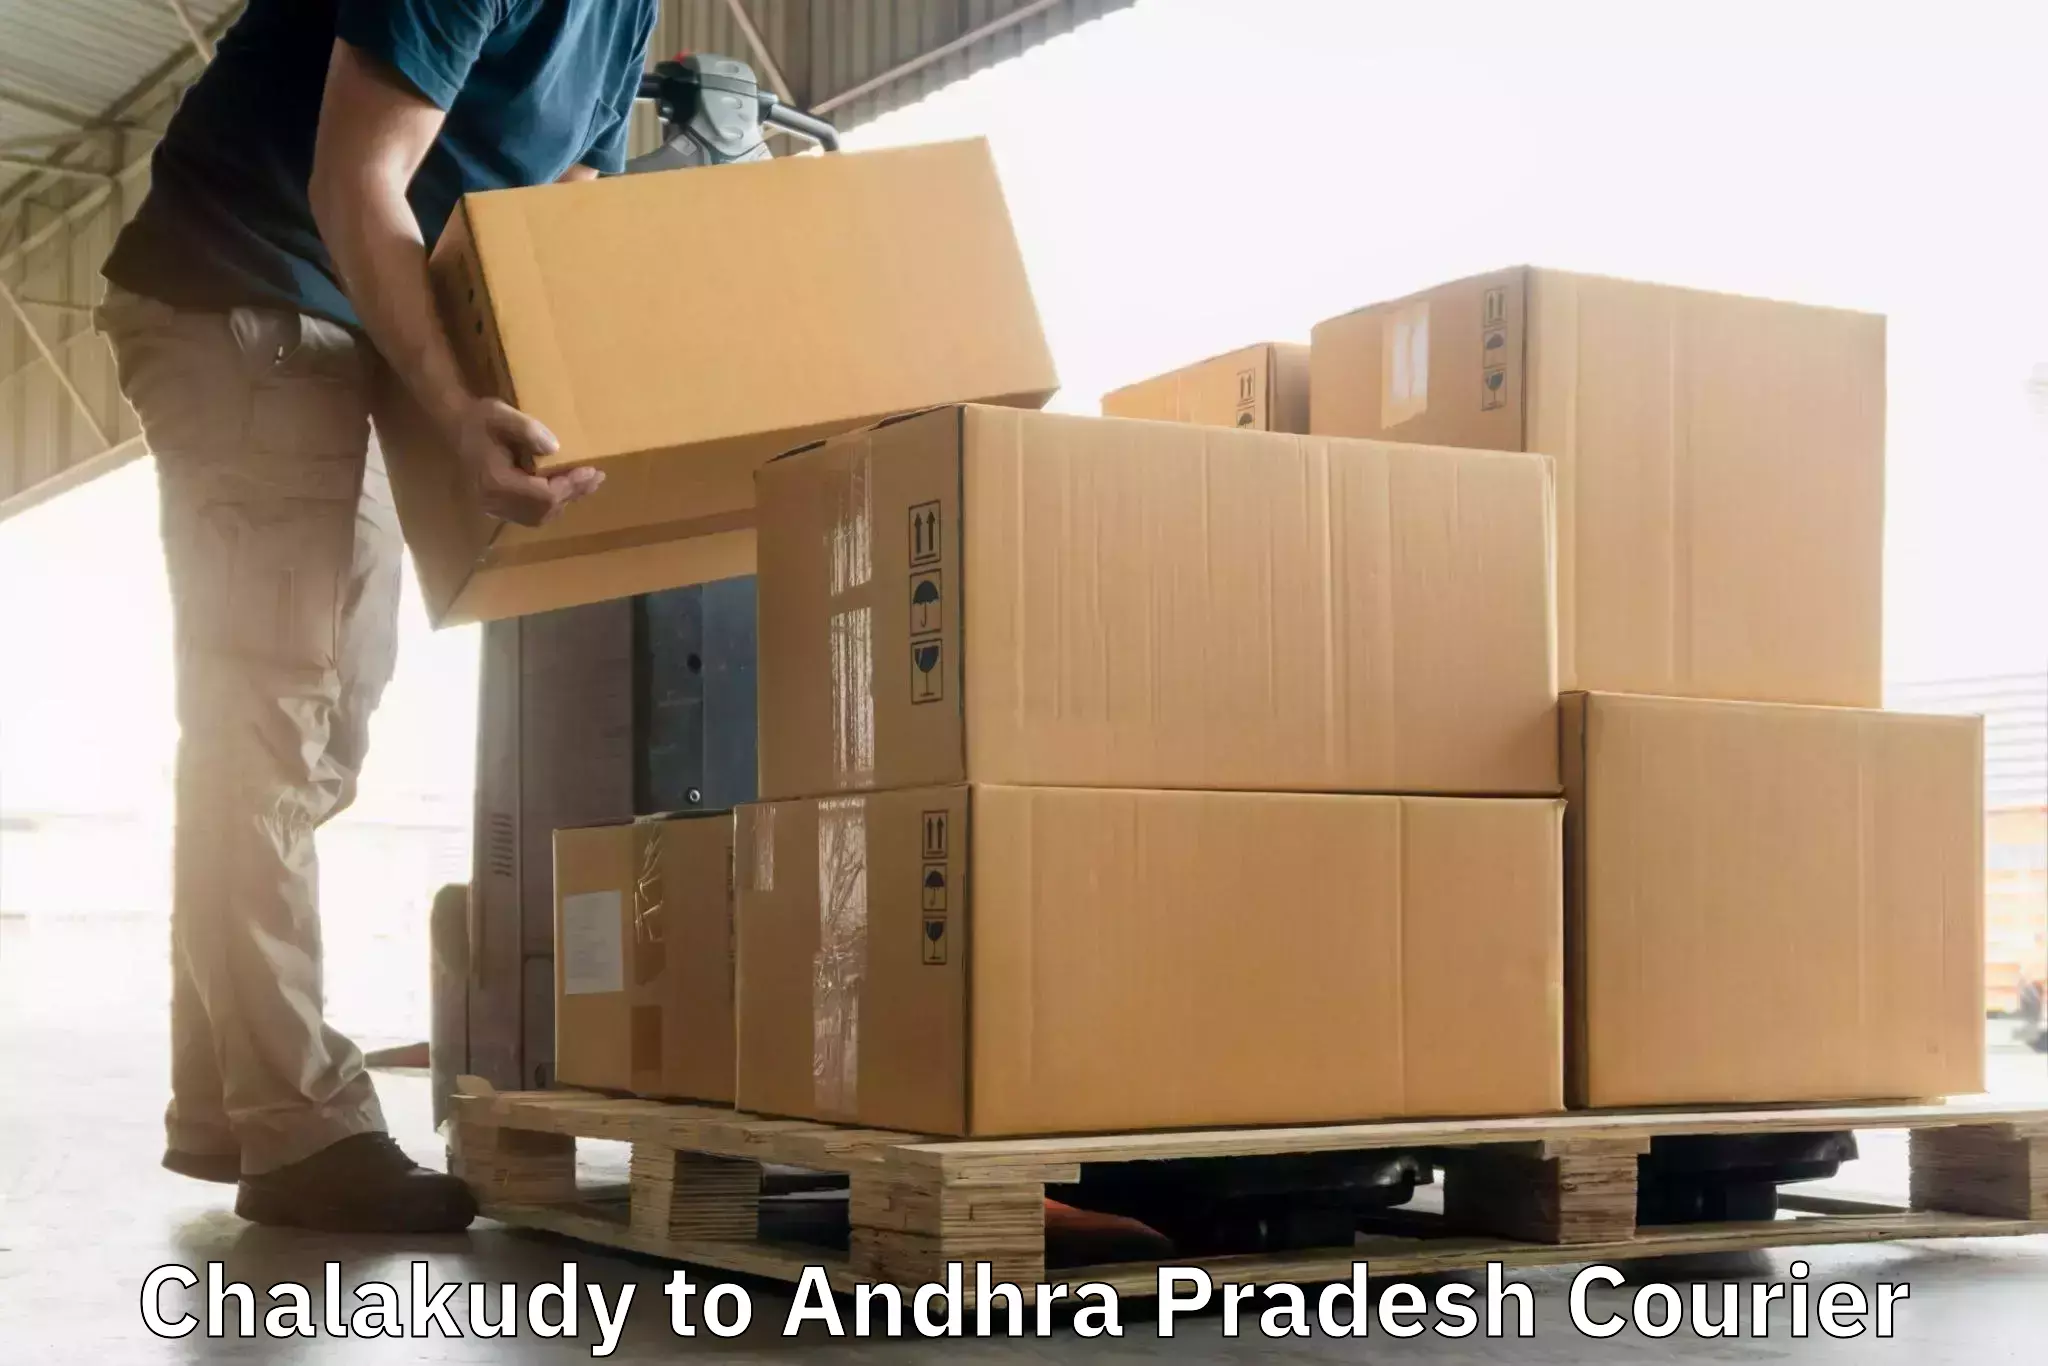 Express package delivery in Chalakudy to Vinukonda